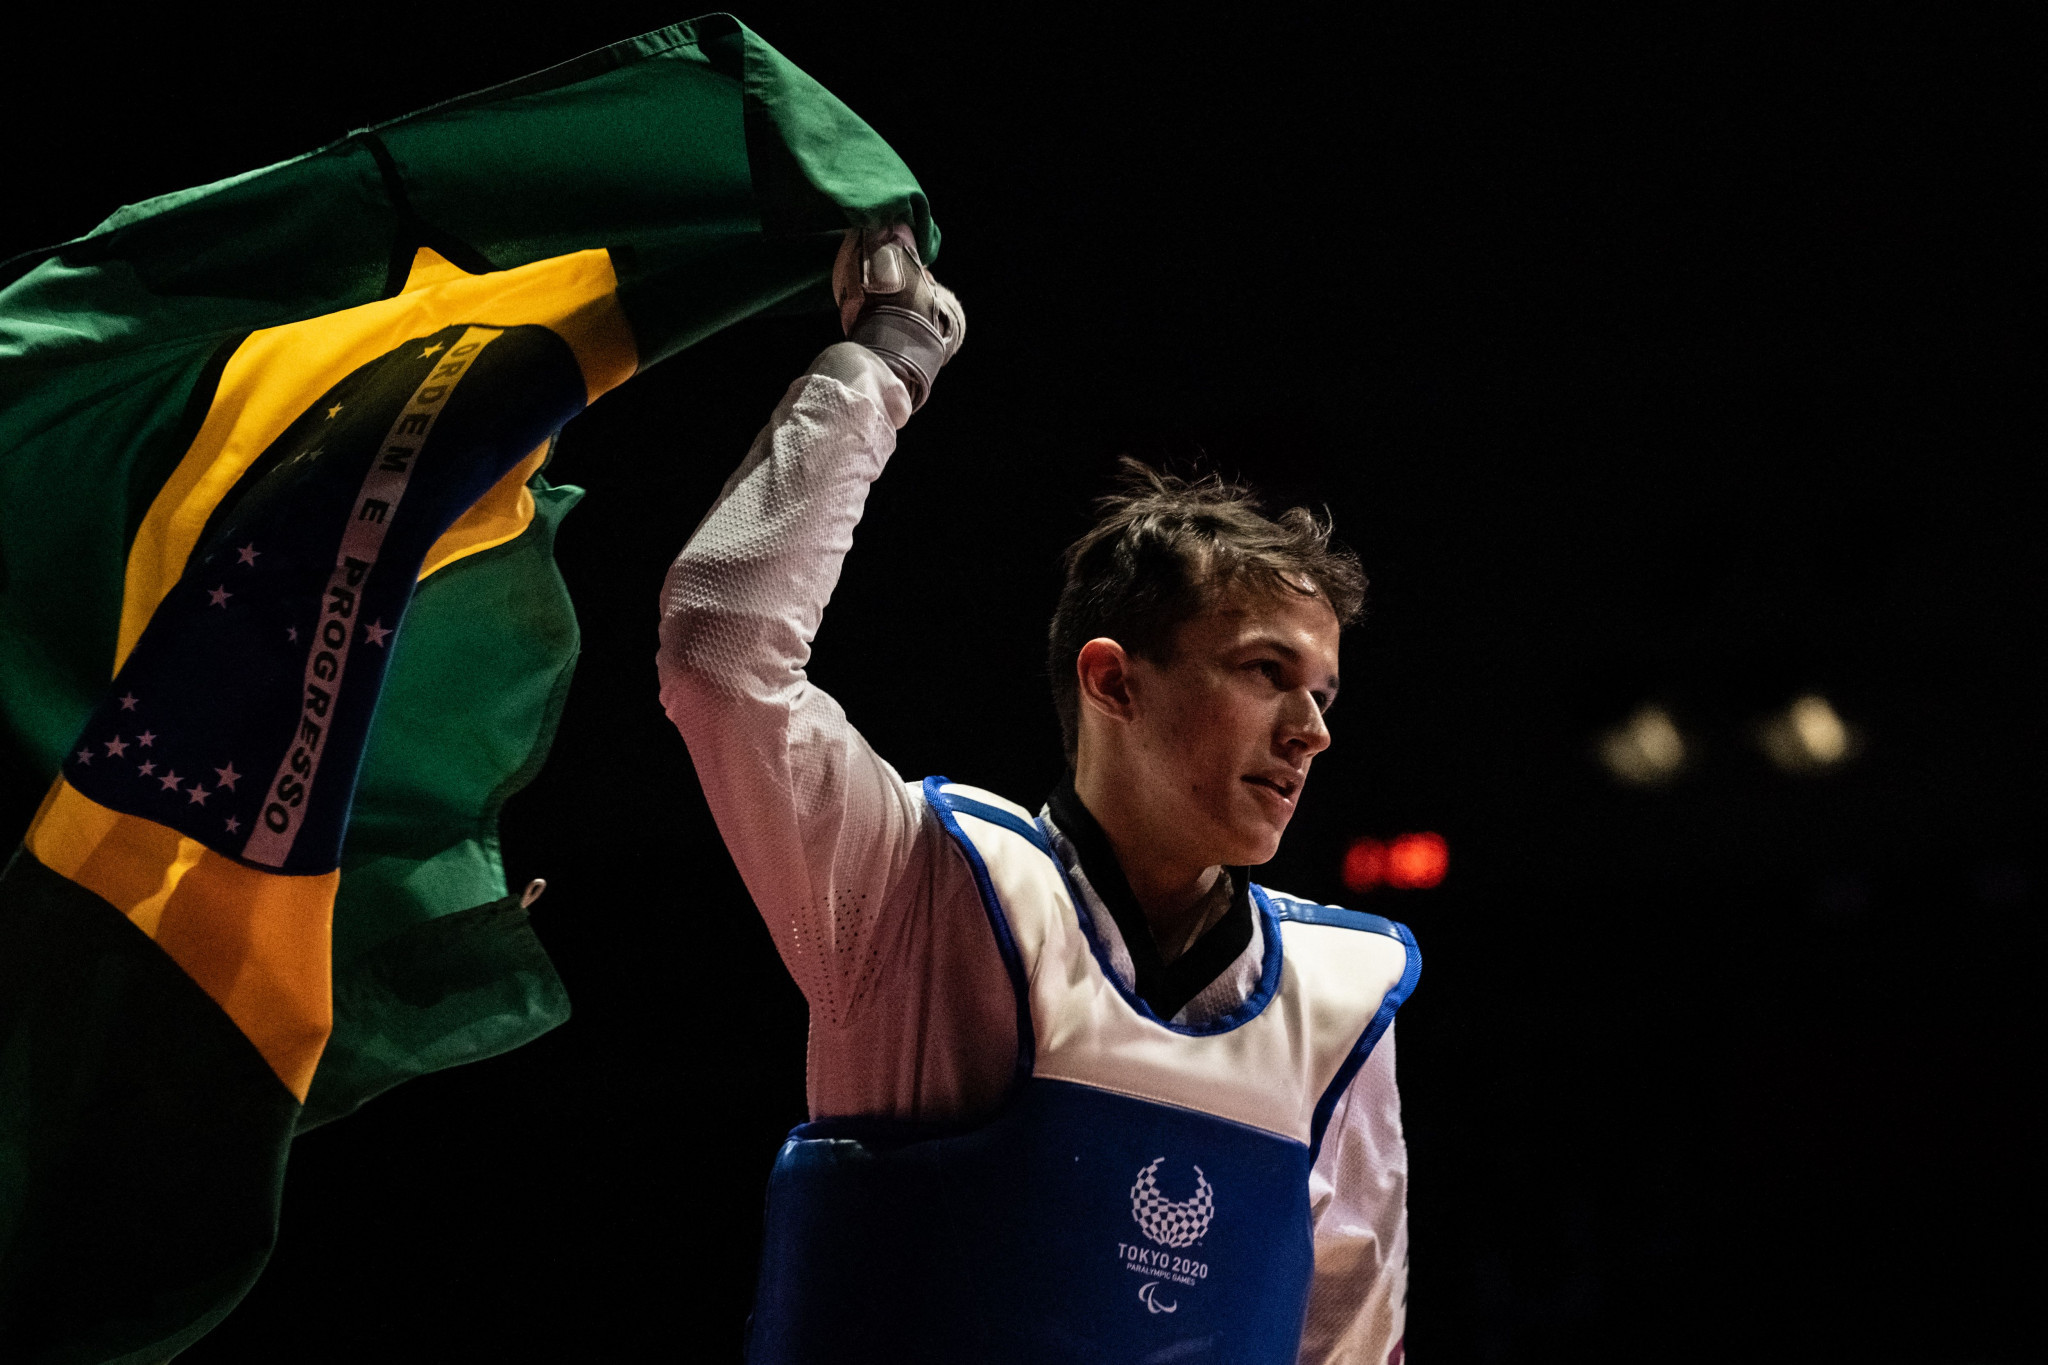 Brazilian Nathan Torquato is the reigning Olympic champion in his category. © Getty Images